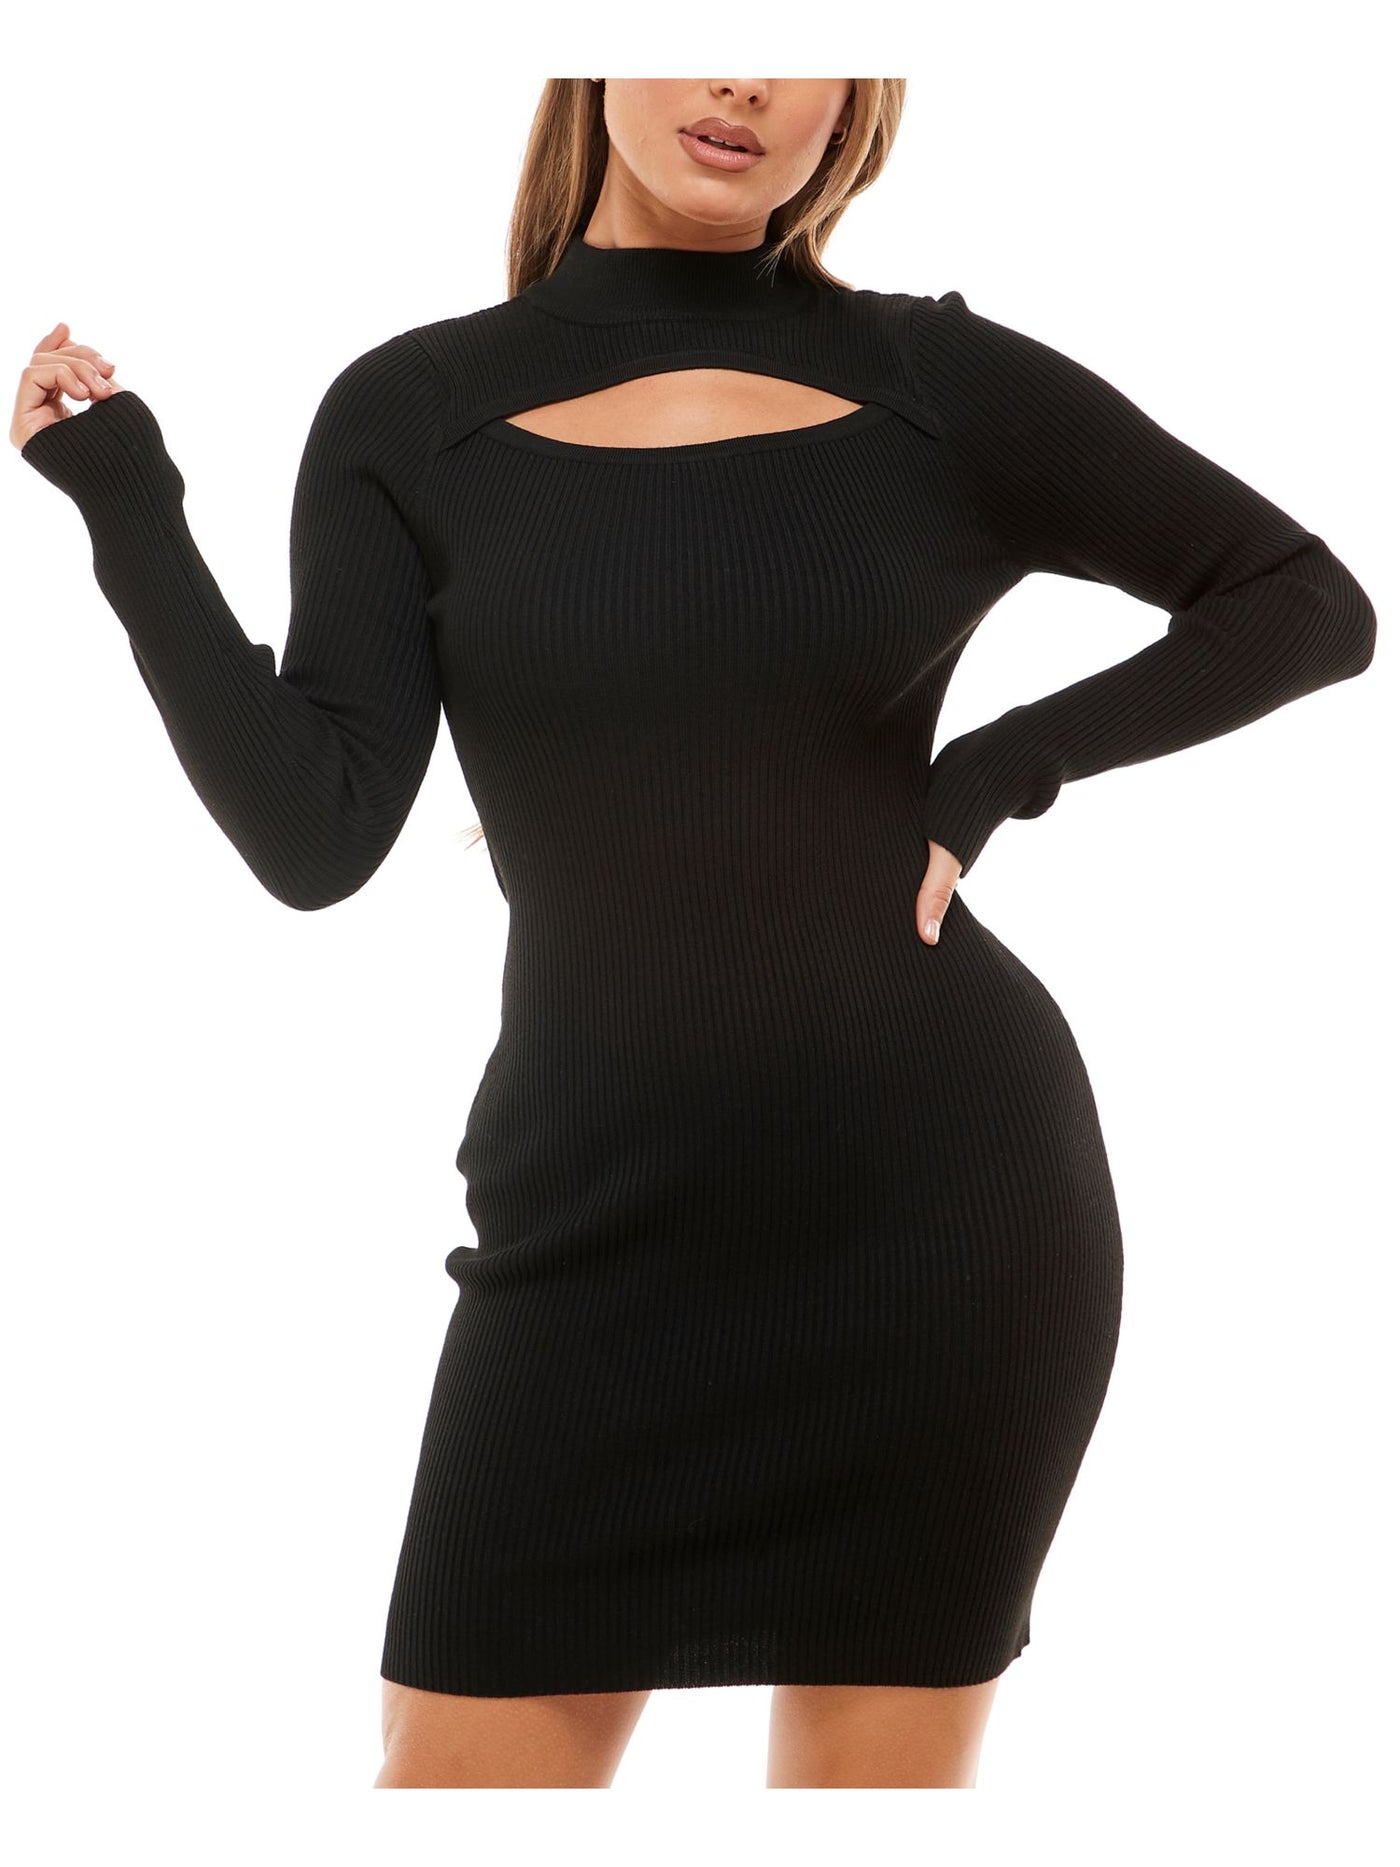 PLANET GOLD Womens Black Ribbed Cut Out Long Sleeve Mock Neck Above The Knee Party Sweater Dress Juniors XXS